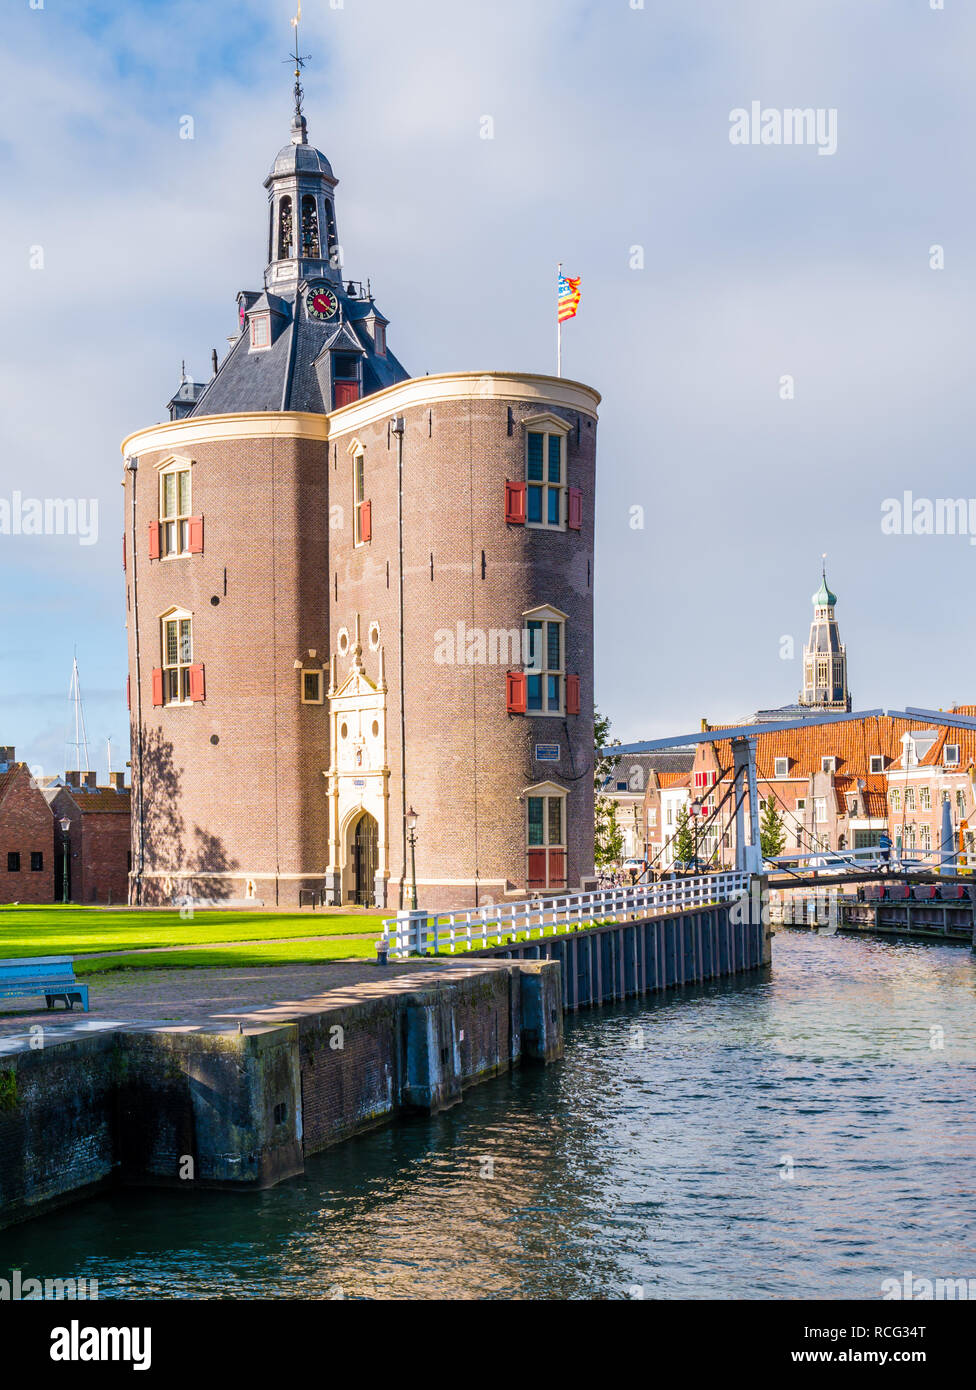 Drommedaris defence tower and draw bridge over canal in old harbour of historic city of Enkhuizen, Noord-Holland, Netherlands Stock Photo